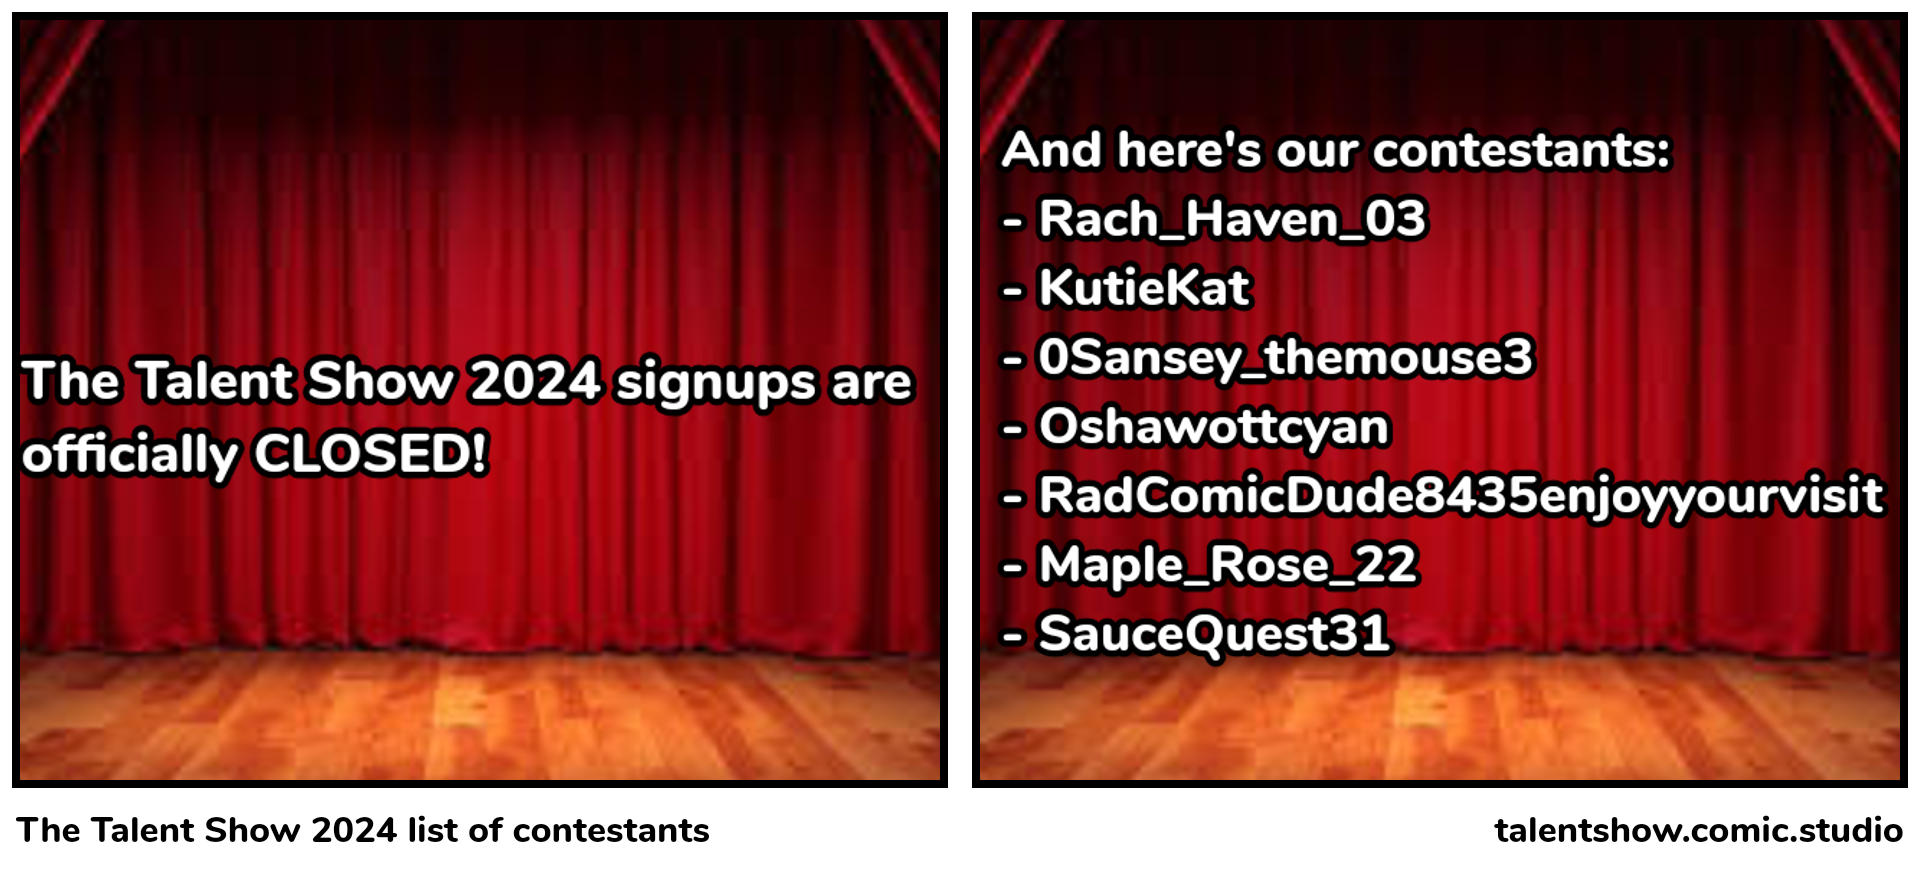 The Talent Show 2024 list of contestants